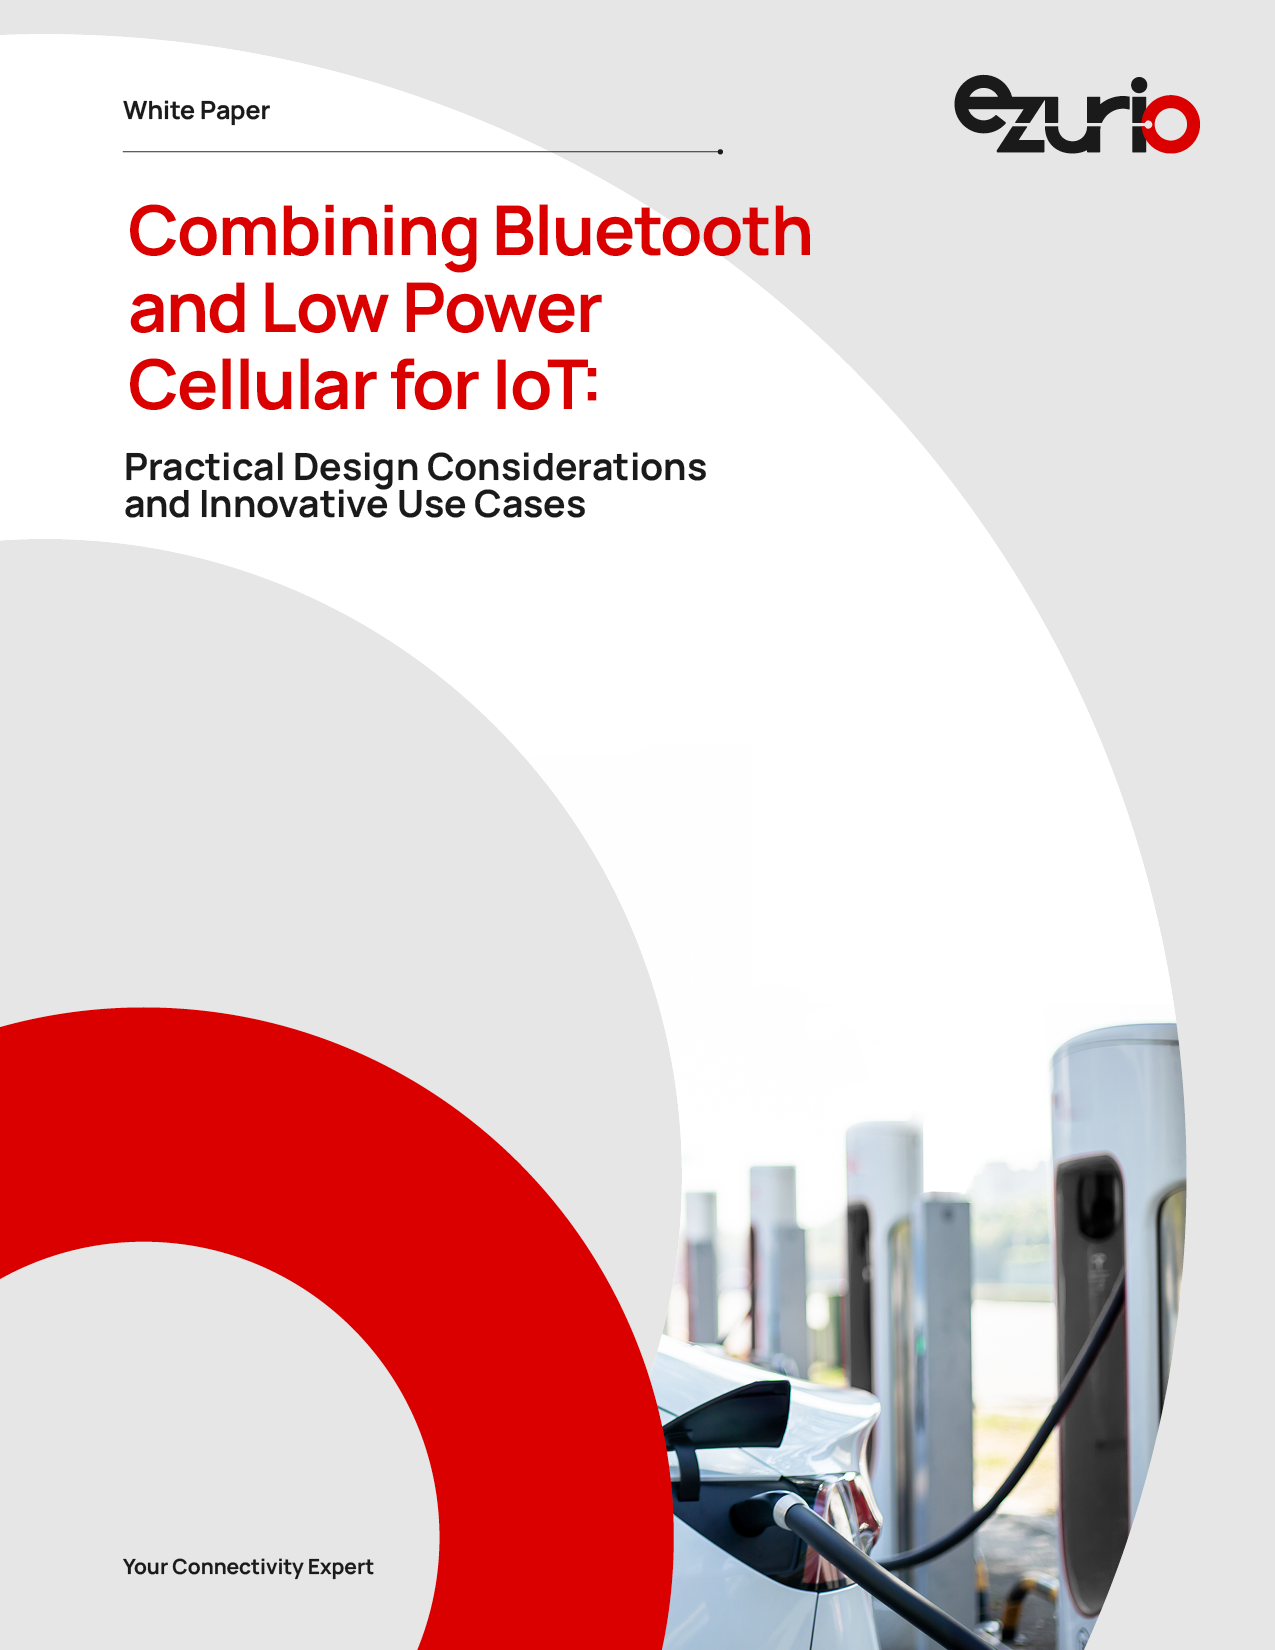 Combining Bluetooth and Low Power Cellular for IoT: Practical Design Considerations and Innovative Use Cases